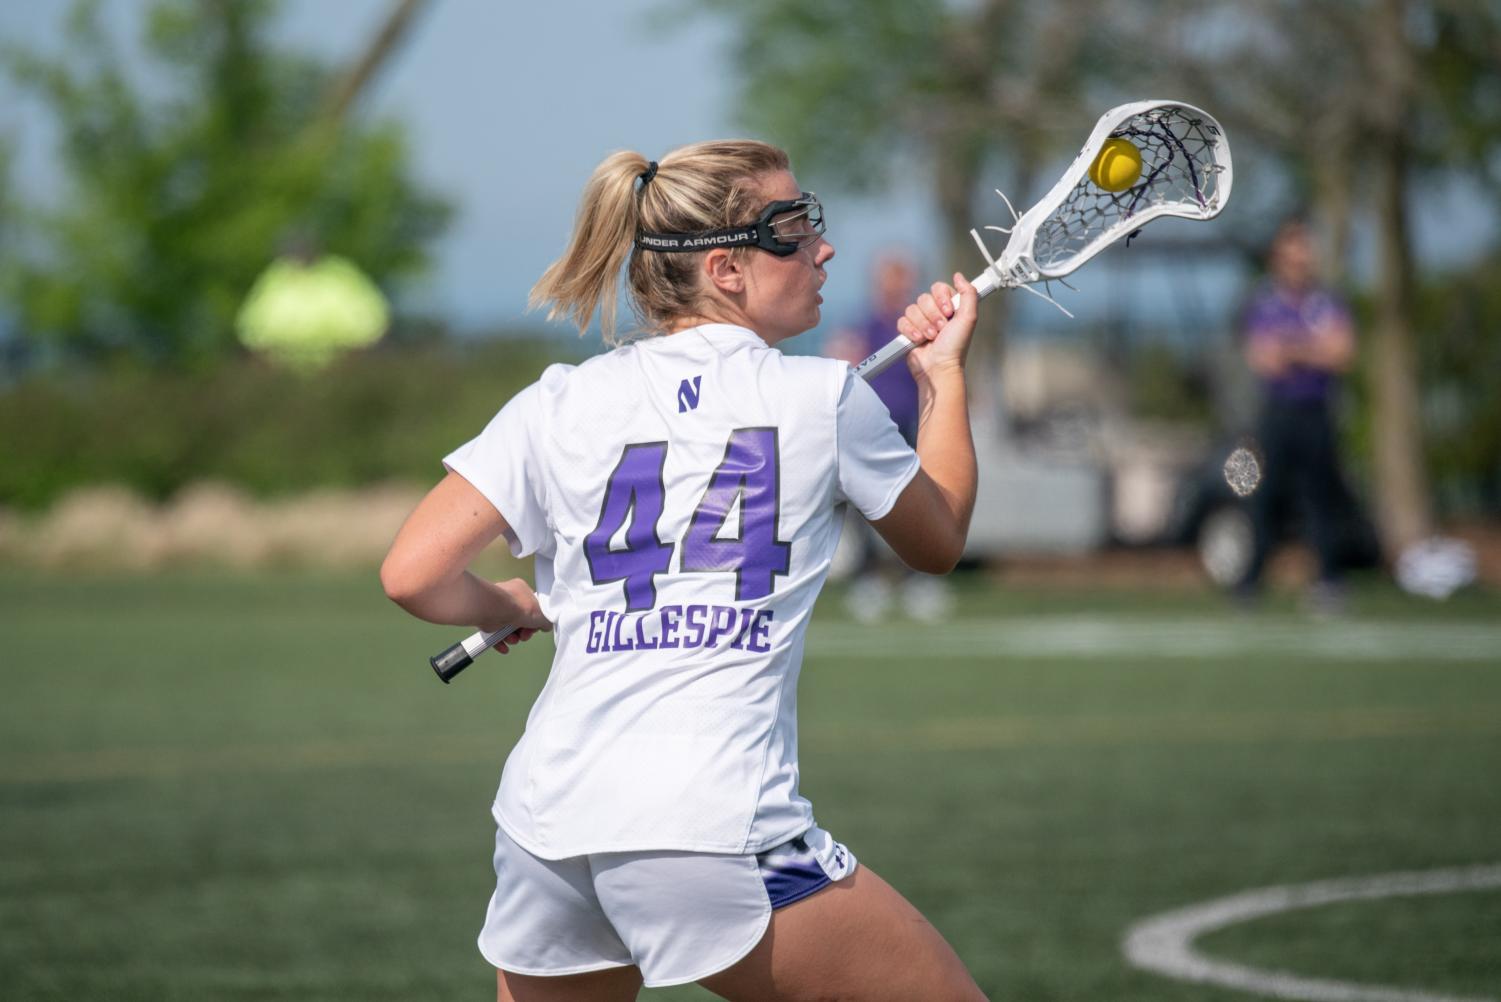 A player in a white jersey holding a lacrosse stick catches and cradles the ball.